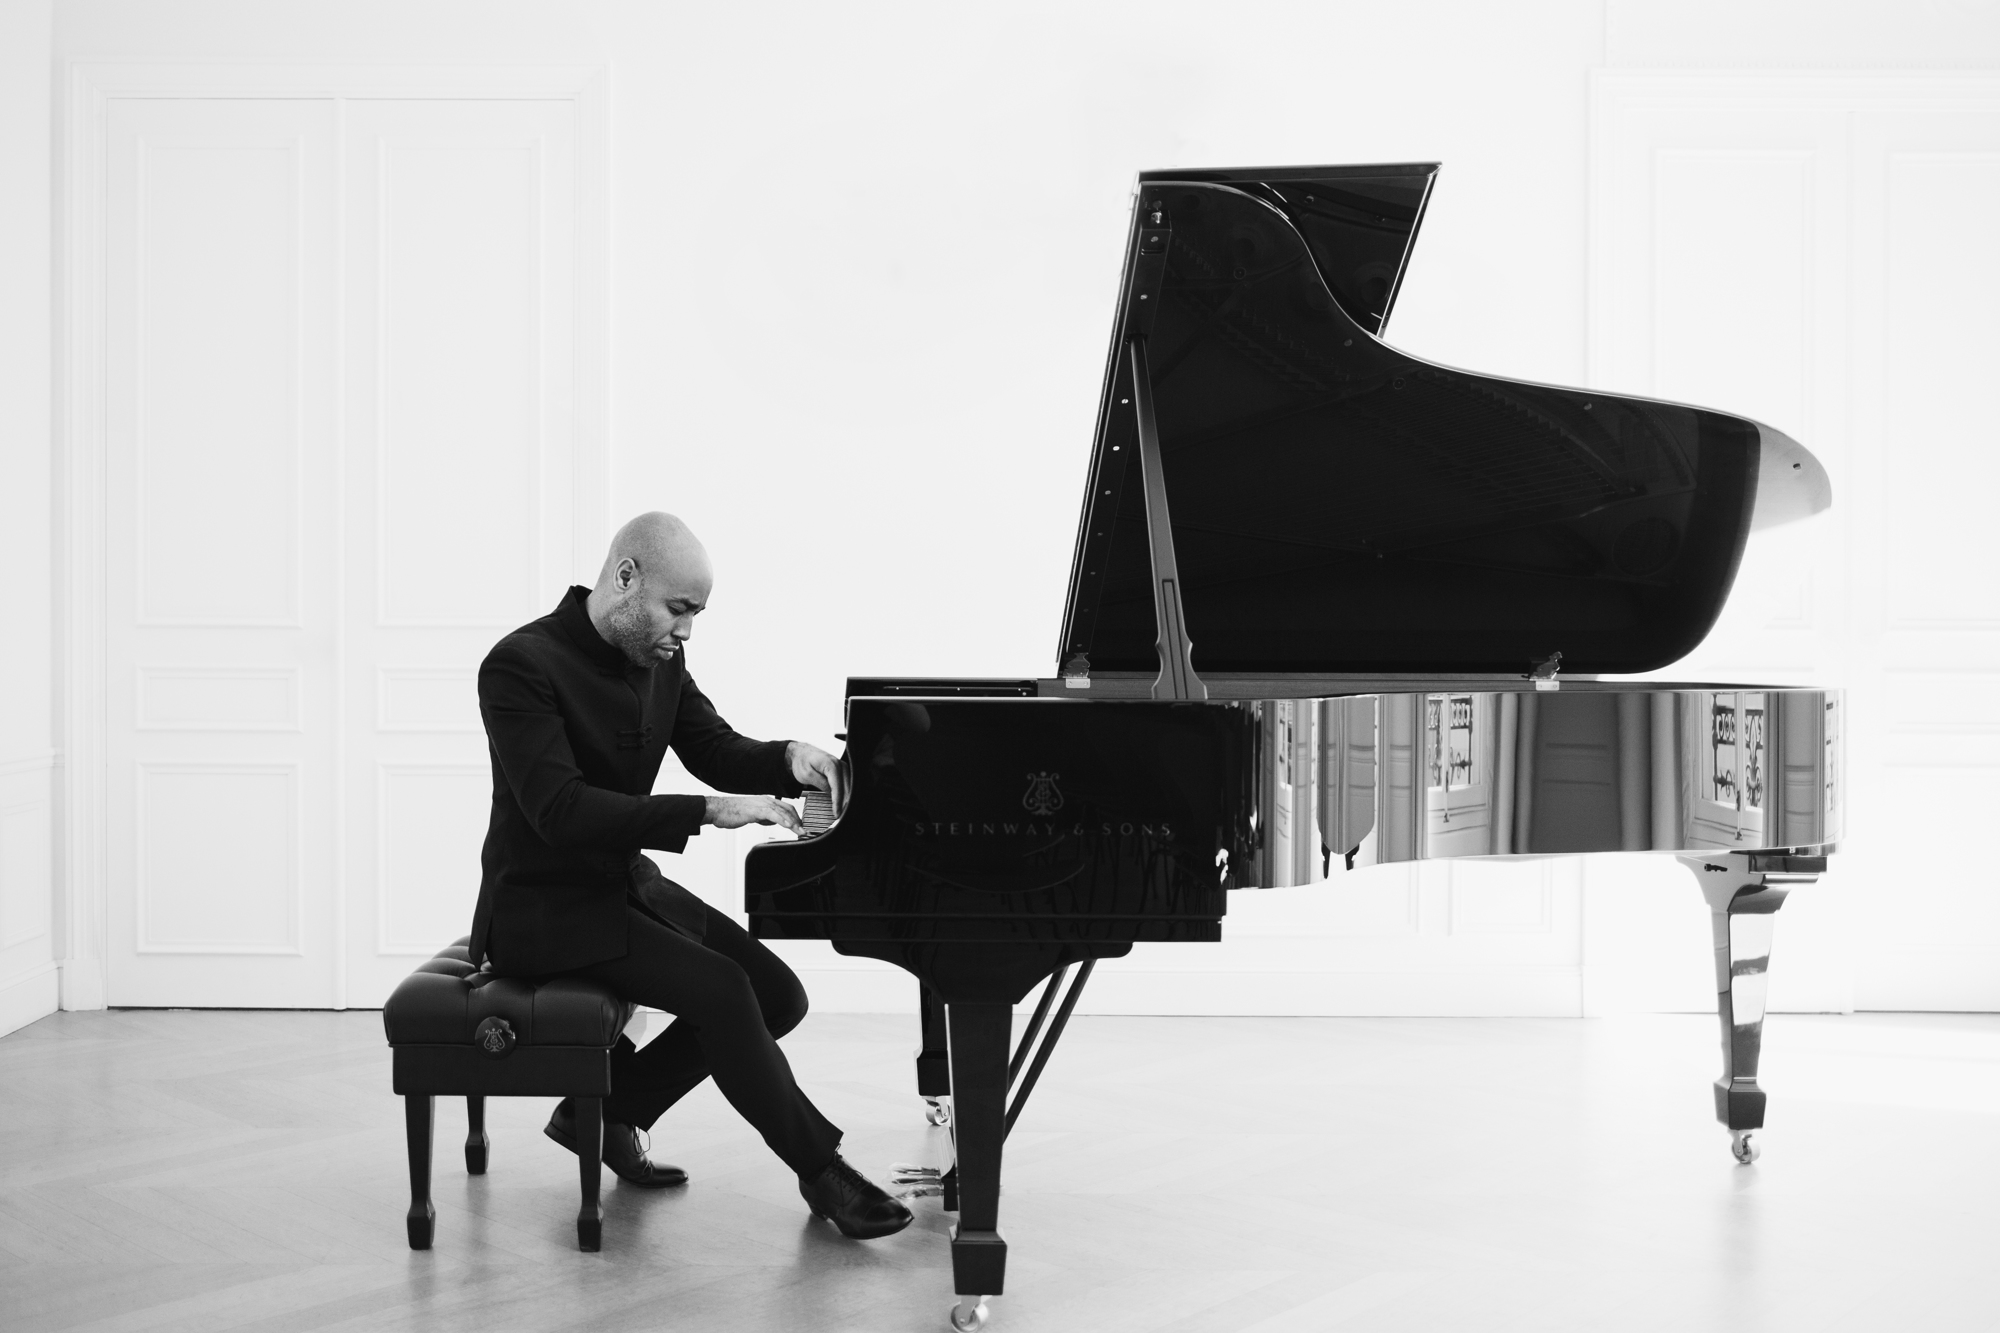 Pianist Aaron Diehl will take the audience on a musical journey through Gershwin's Piano Concerto in F Minor. (Courtesy photo.)